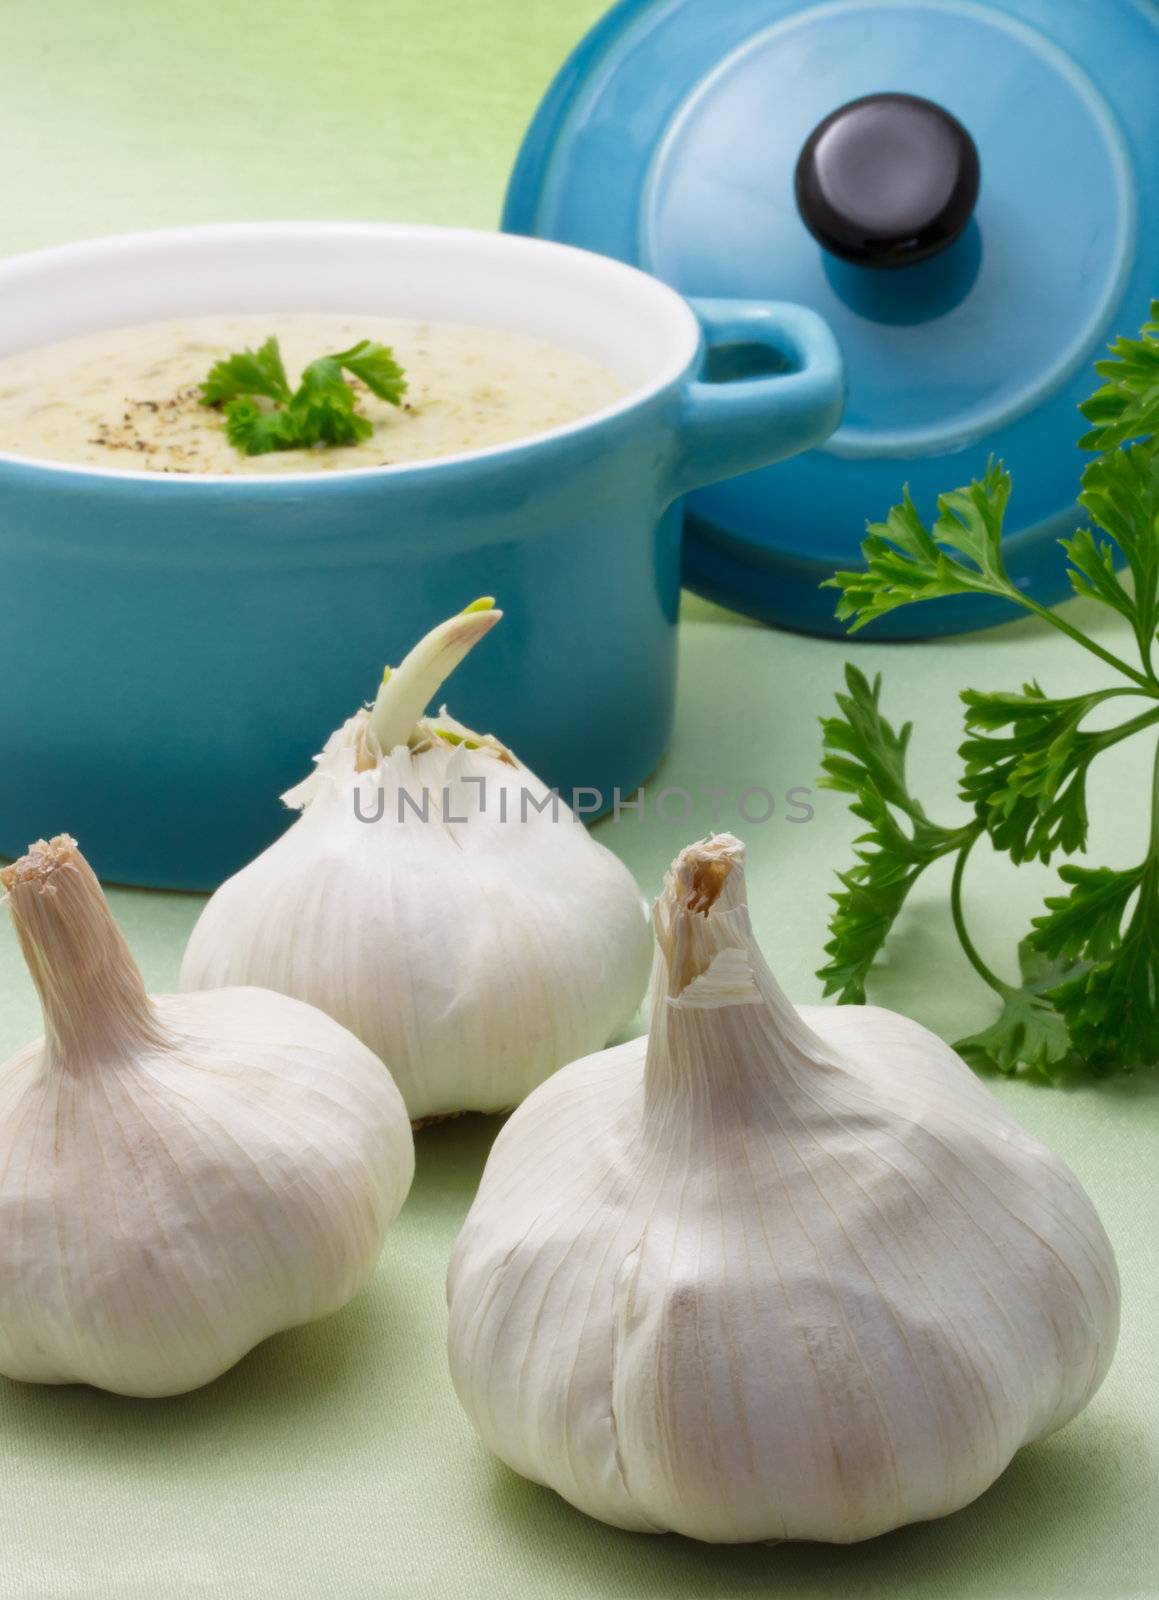 Garlic with creamy soup in blue pot